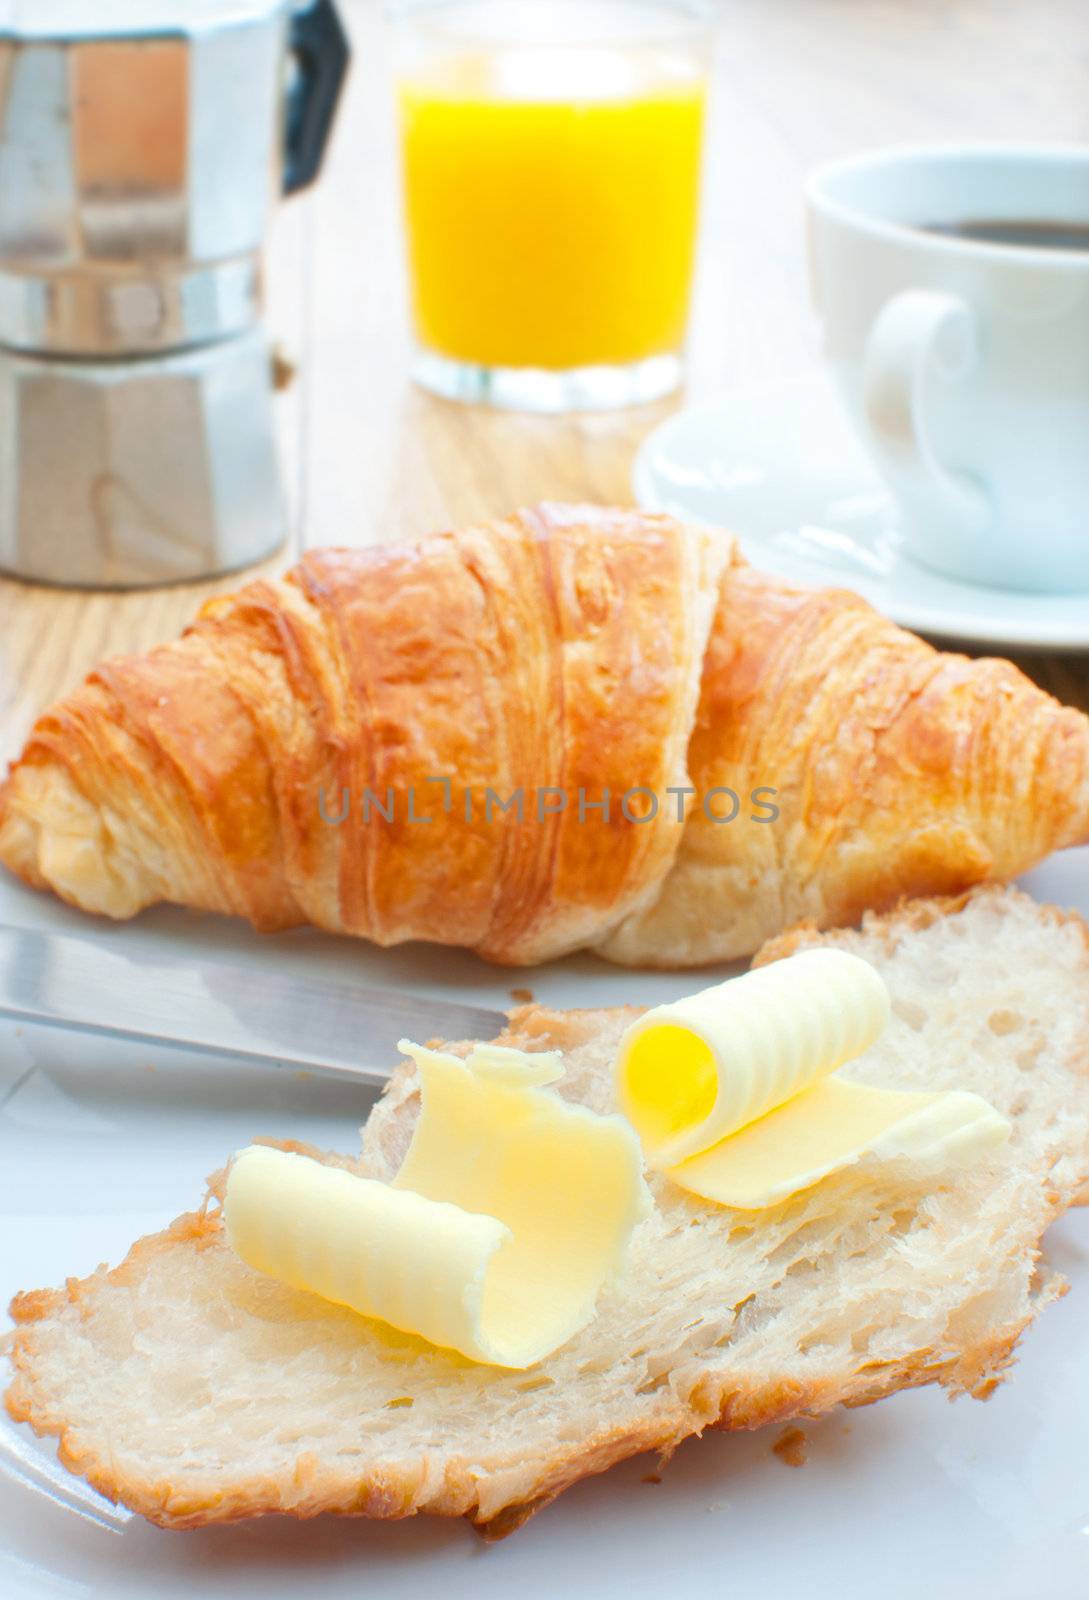 Breakfast coffee with croissant by unikpix